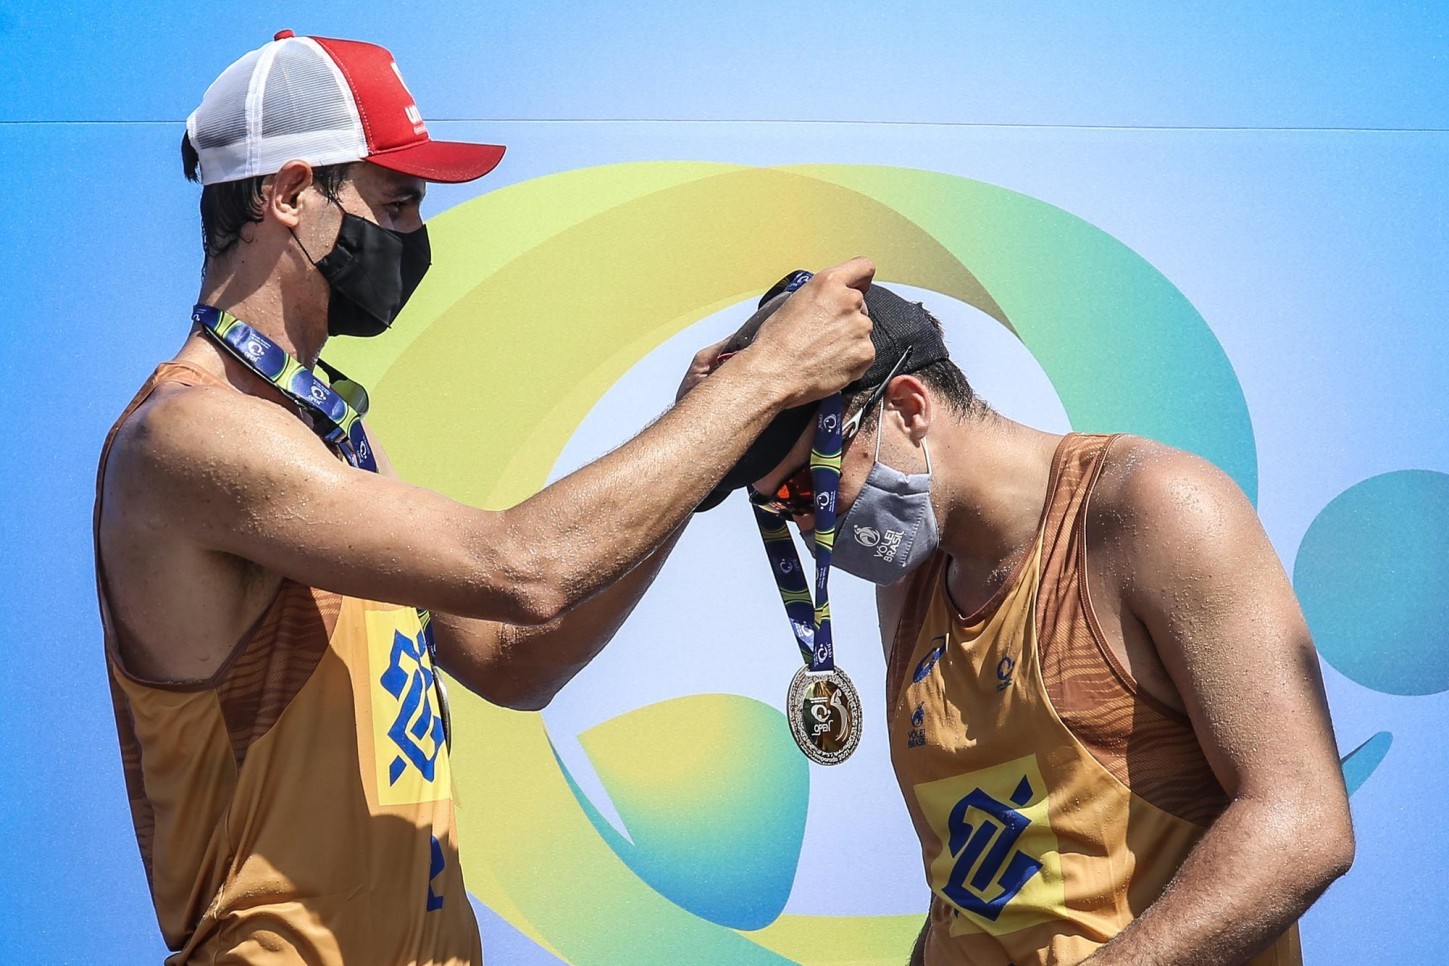 Andre places the gold medal around George's neck during the awarding ceremony